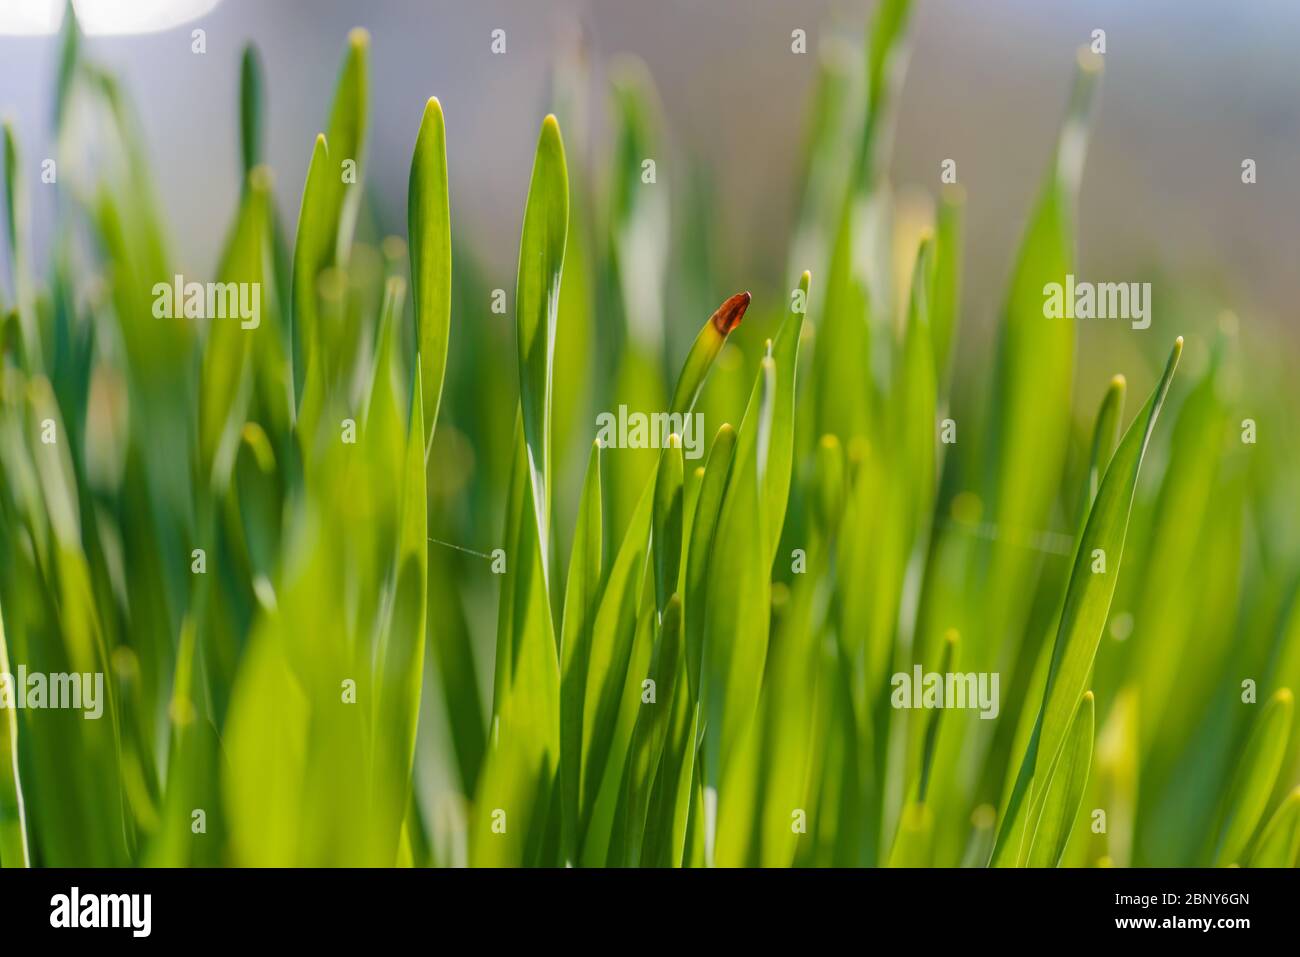 Green Grass. Close-up of bright green grass. Close-up green plant. Stock Photo